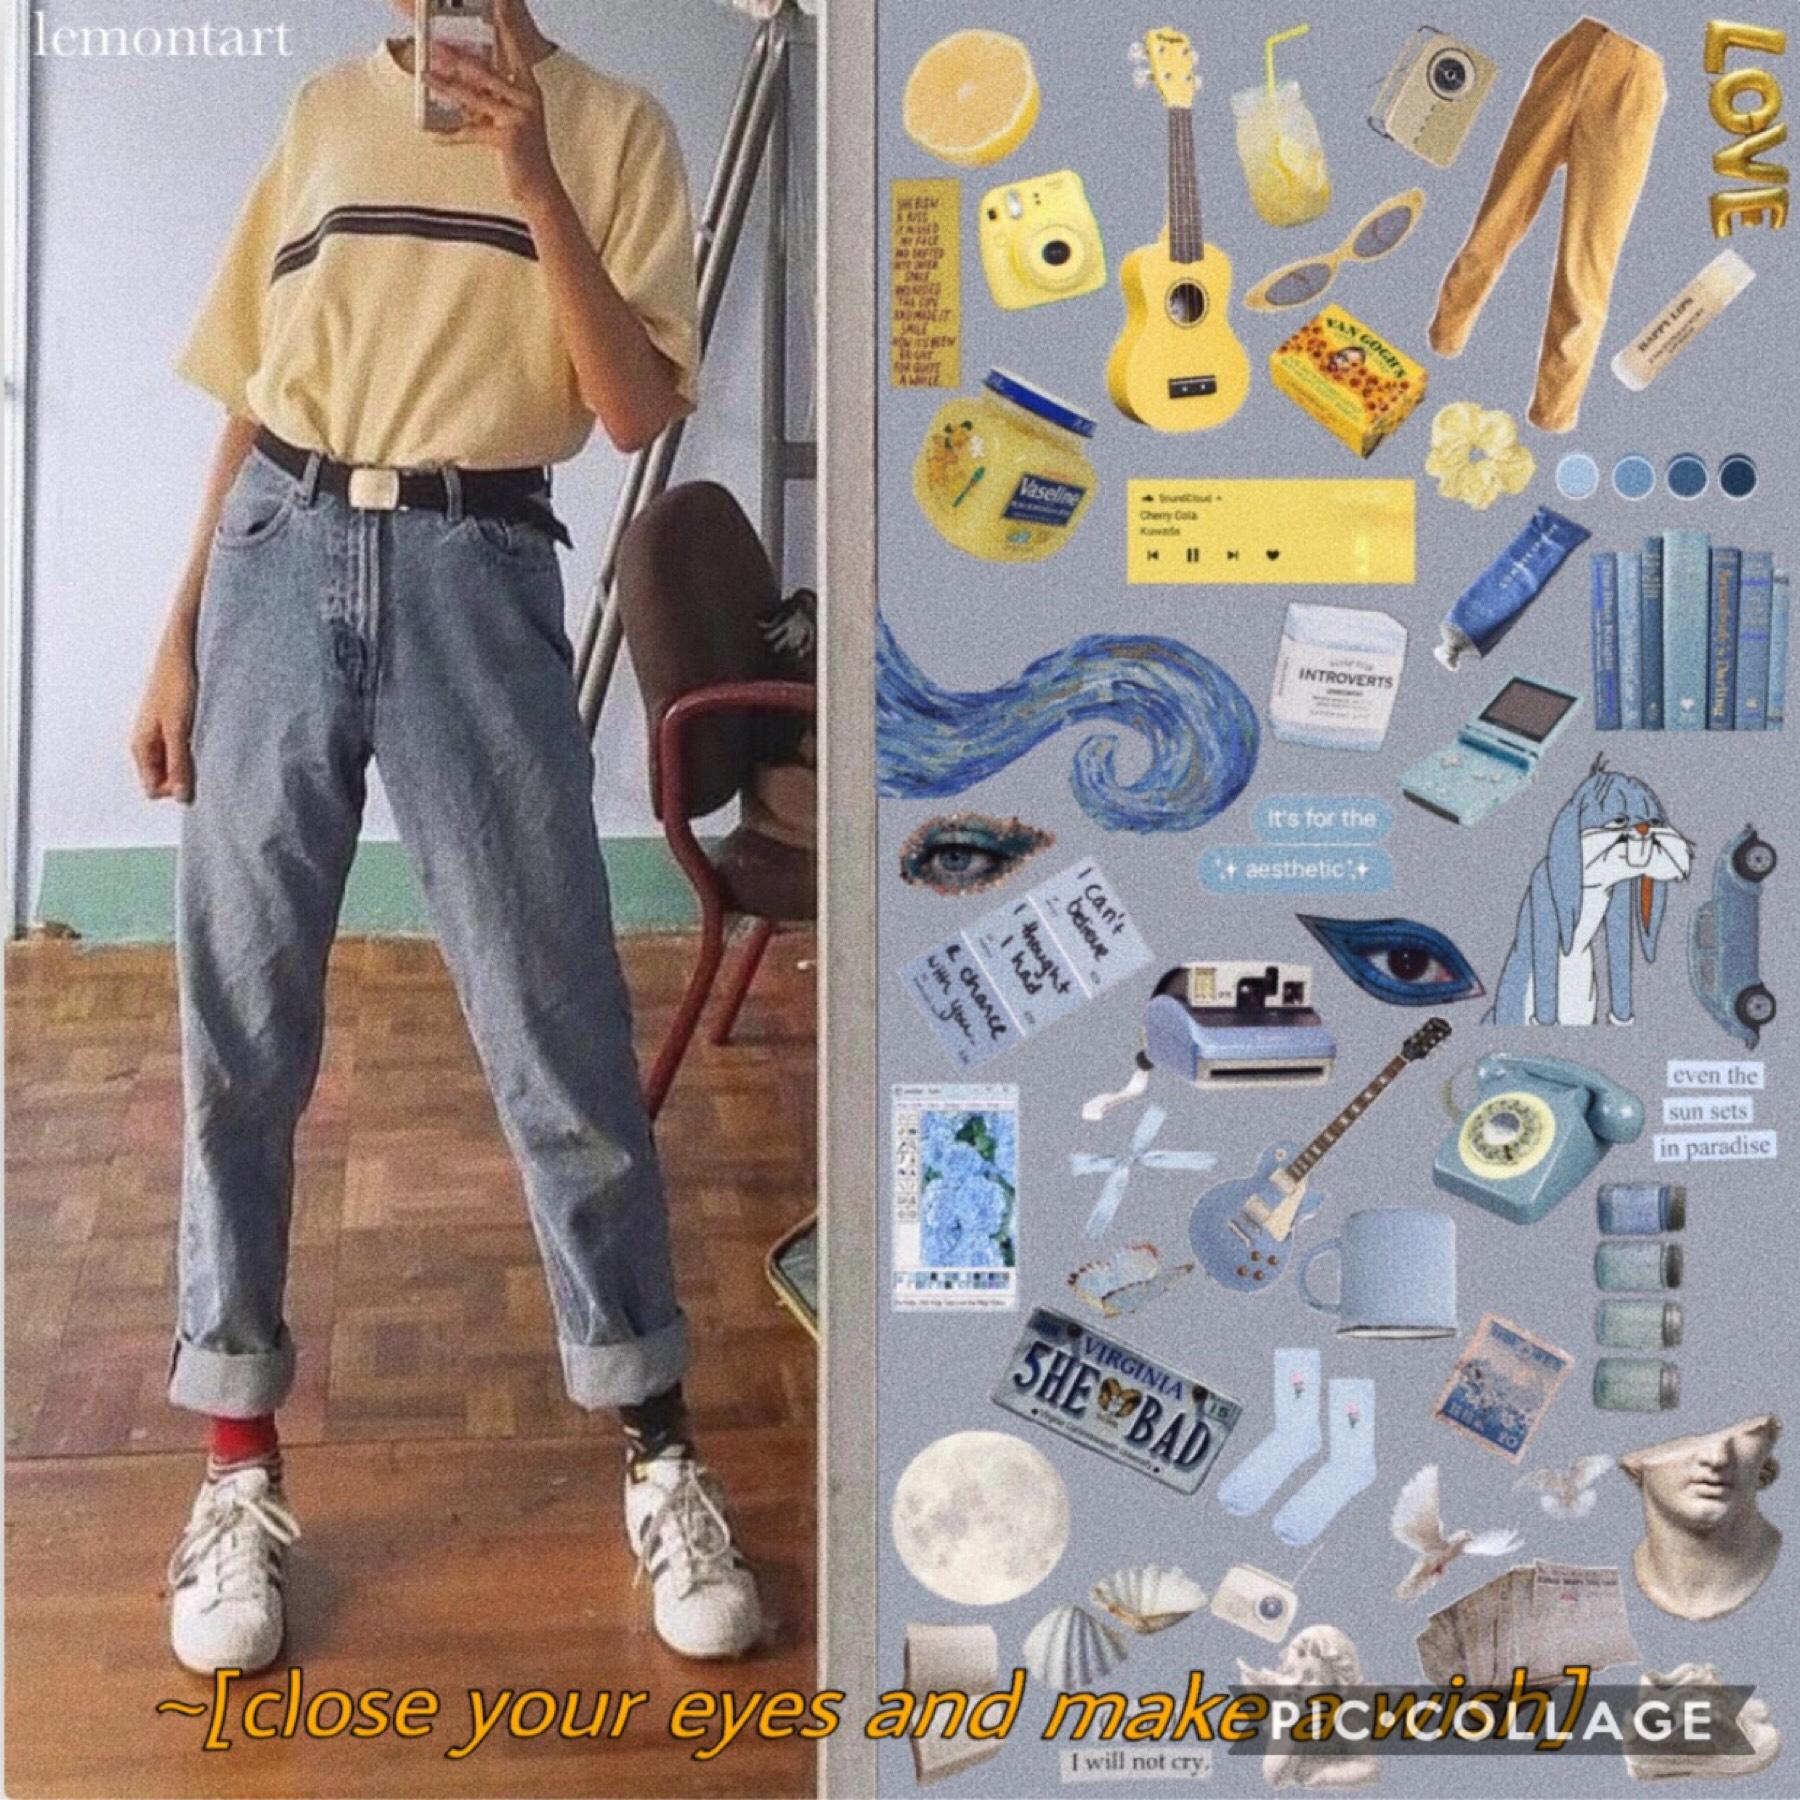 2019.07.07 (tip tap)
what’s up my dudes? i now present to you my trash collage that i whipped up today. update me on your life :) it’s been awhile, and i want to know what’s going on with you wonderful people